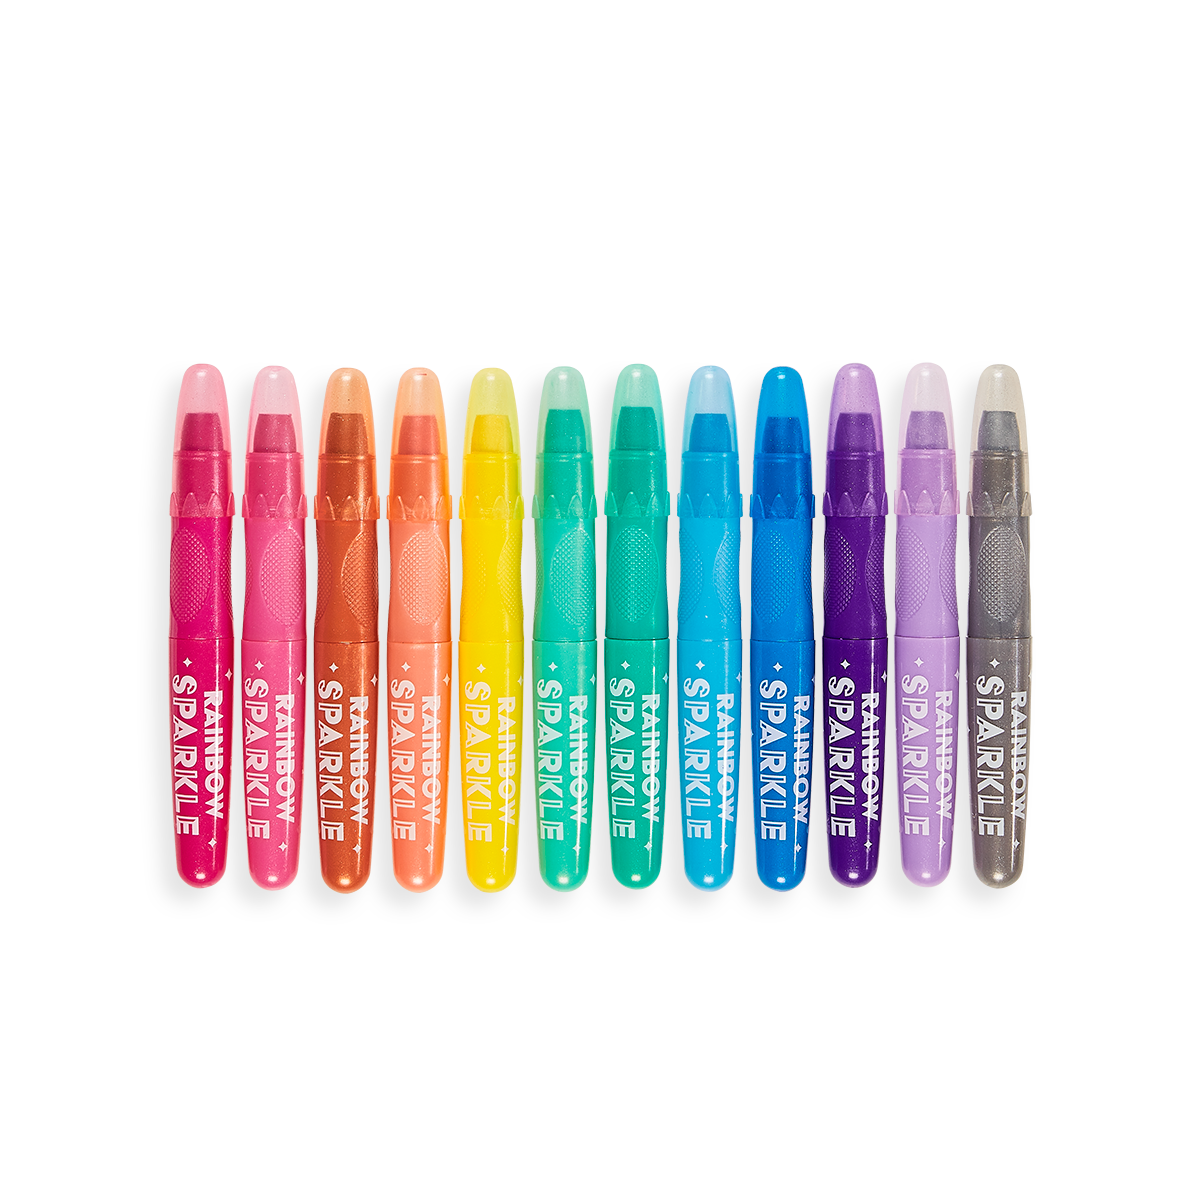 OOLY - Oodles of doodles with these watercolor gel crayons that double as a  paint and coloring tool alike 🌈🖍 Rainbow Sparkle Gel Crayons are made  with a solidified gel that makes